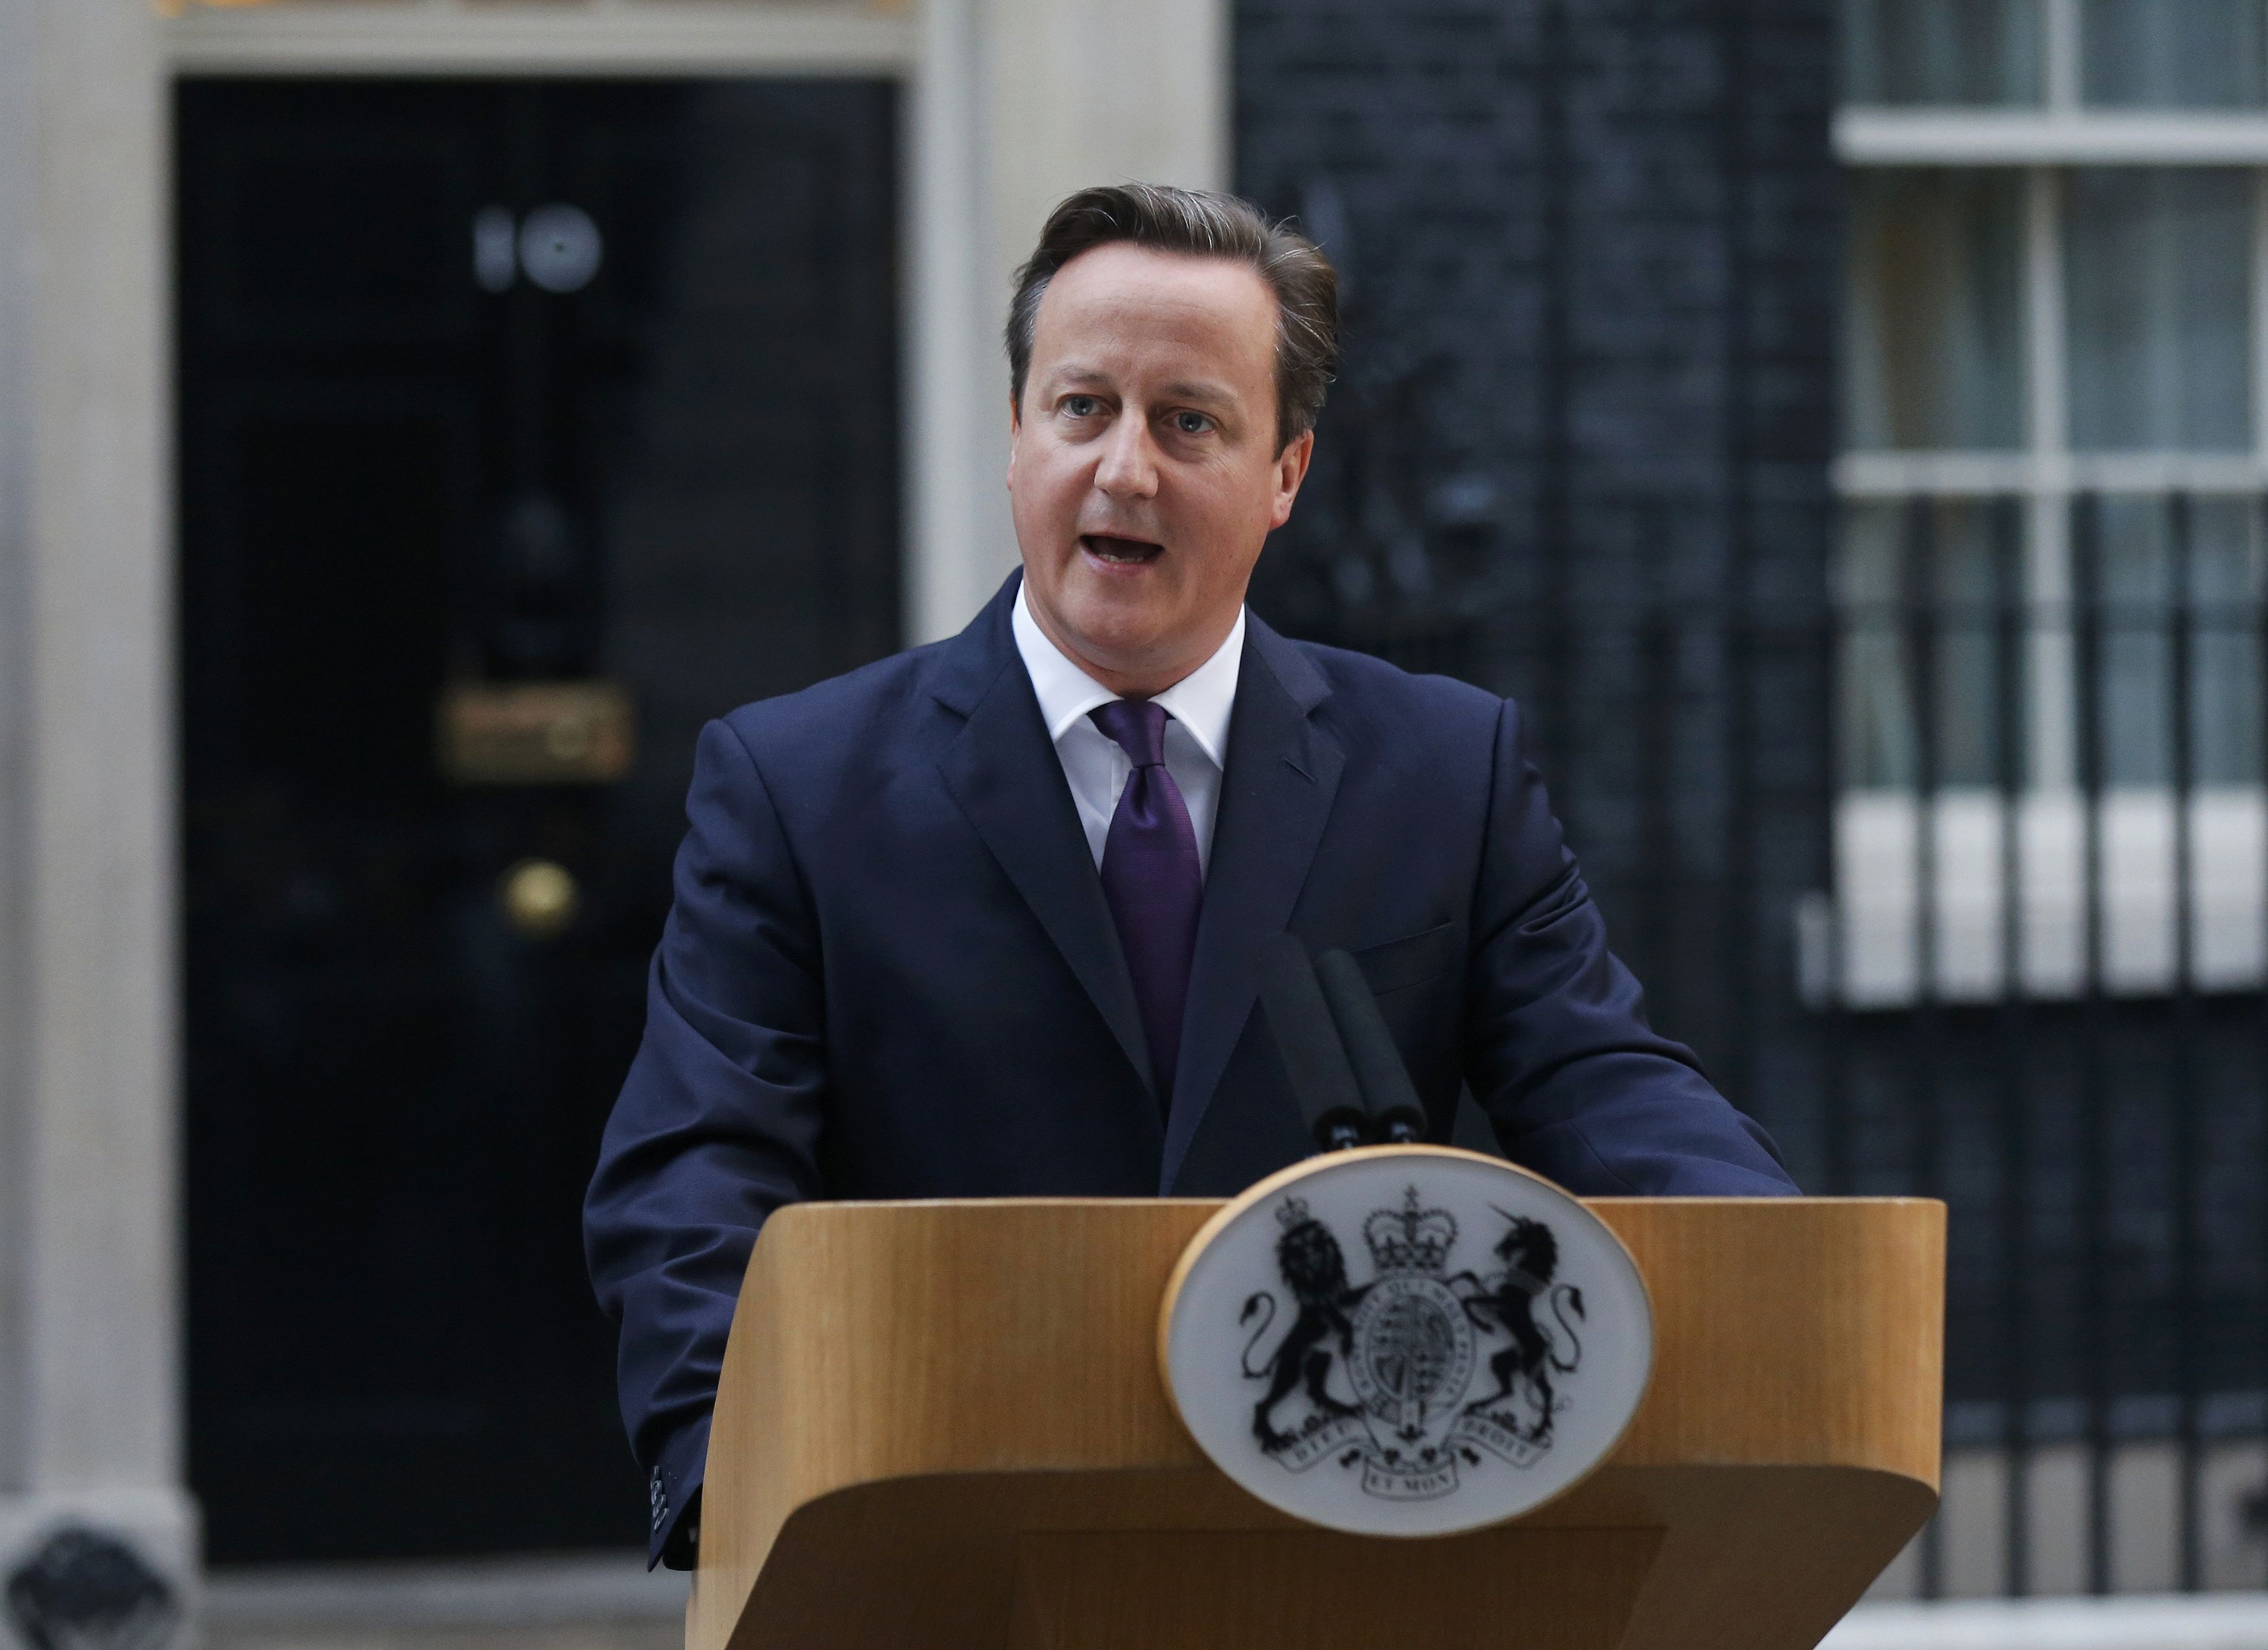 Britain's Prime Minister David Cameron speaks to the media Friday in front of Number 10 Downing Street in London regarding the results of the Scottish independence referendum. | REUTERS